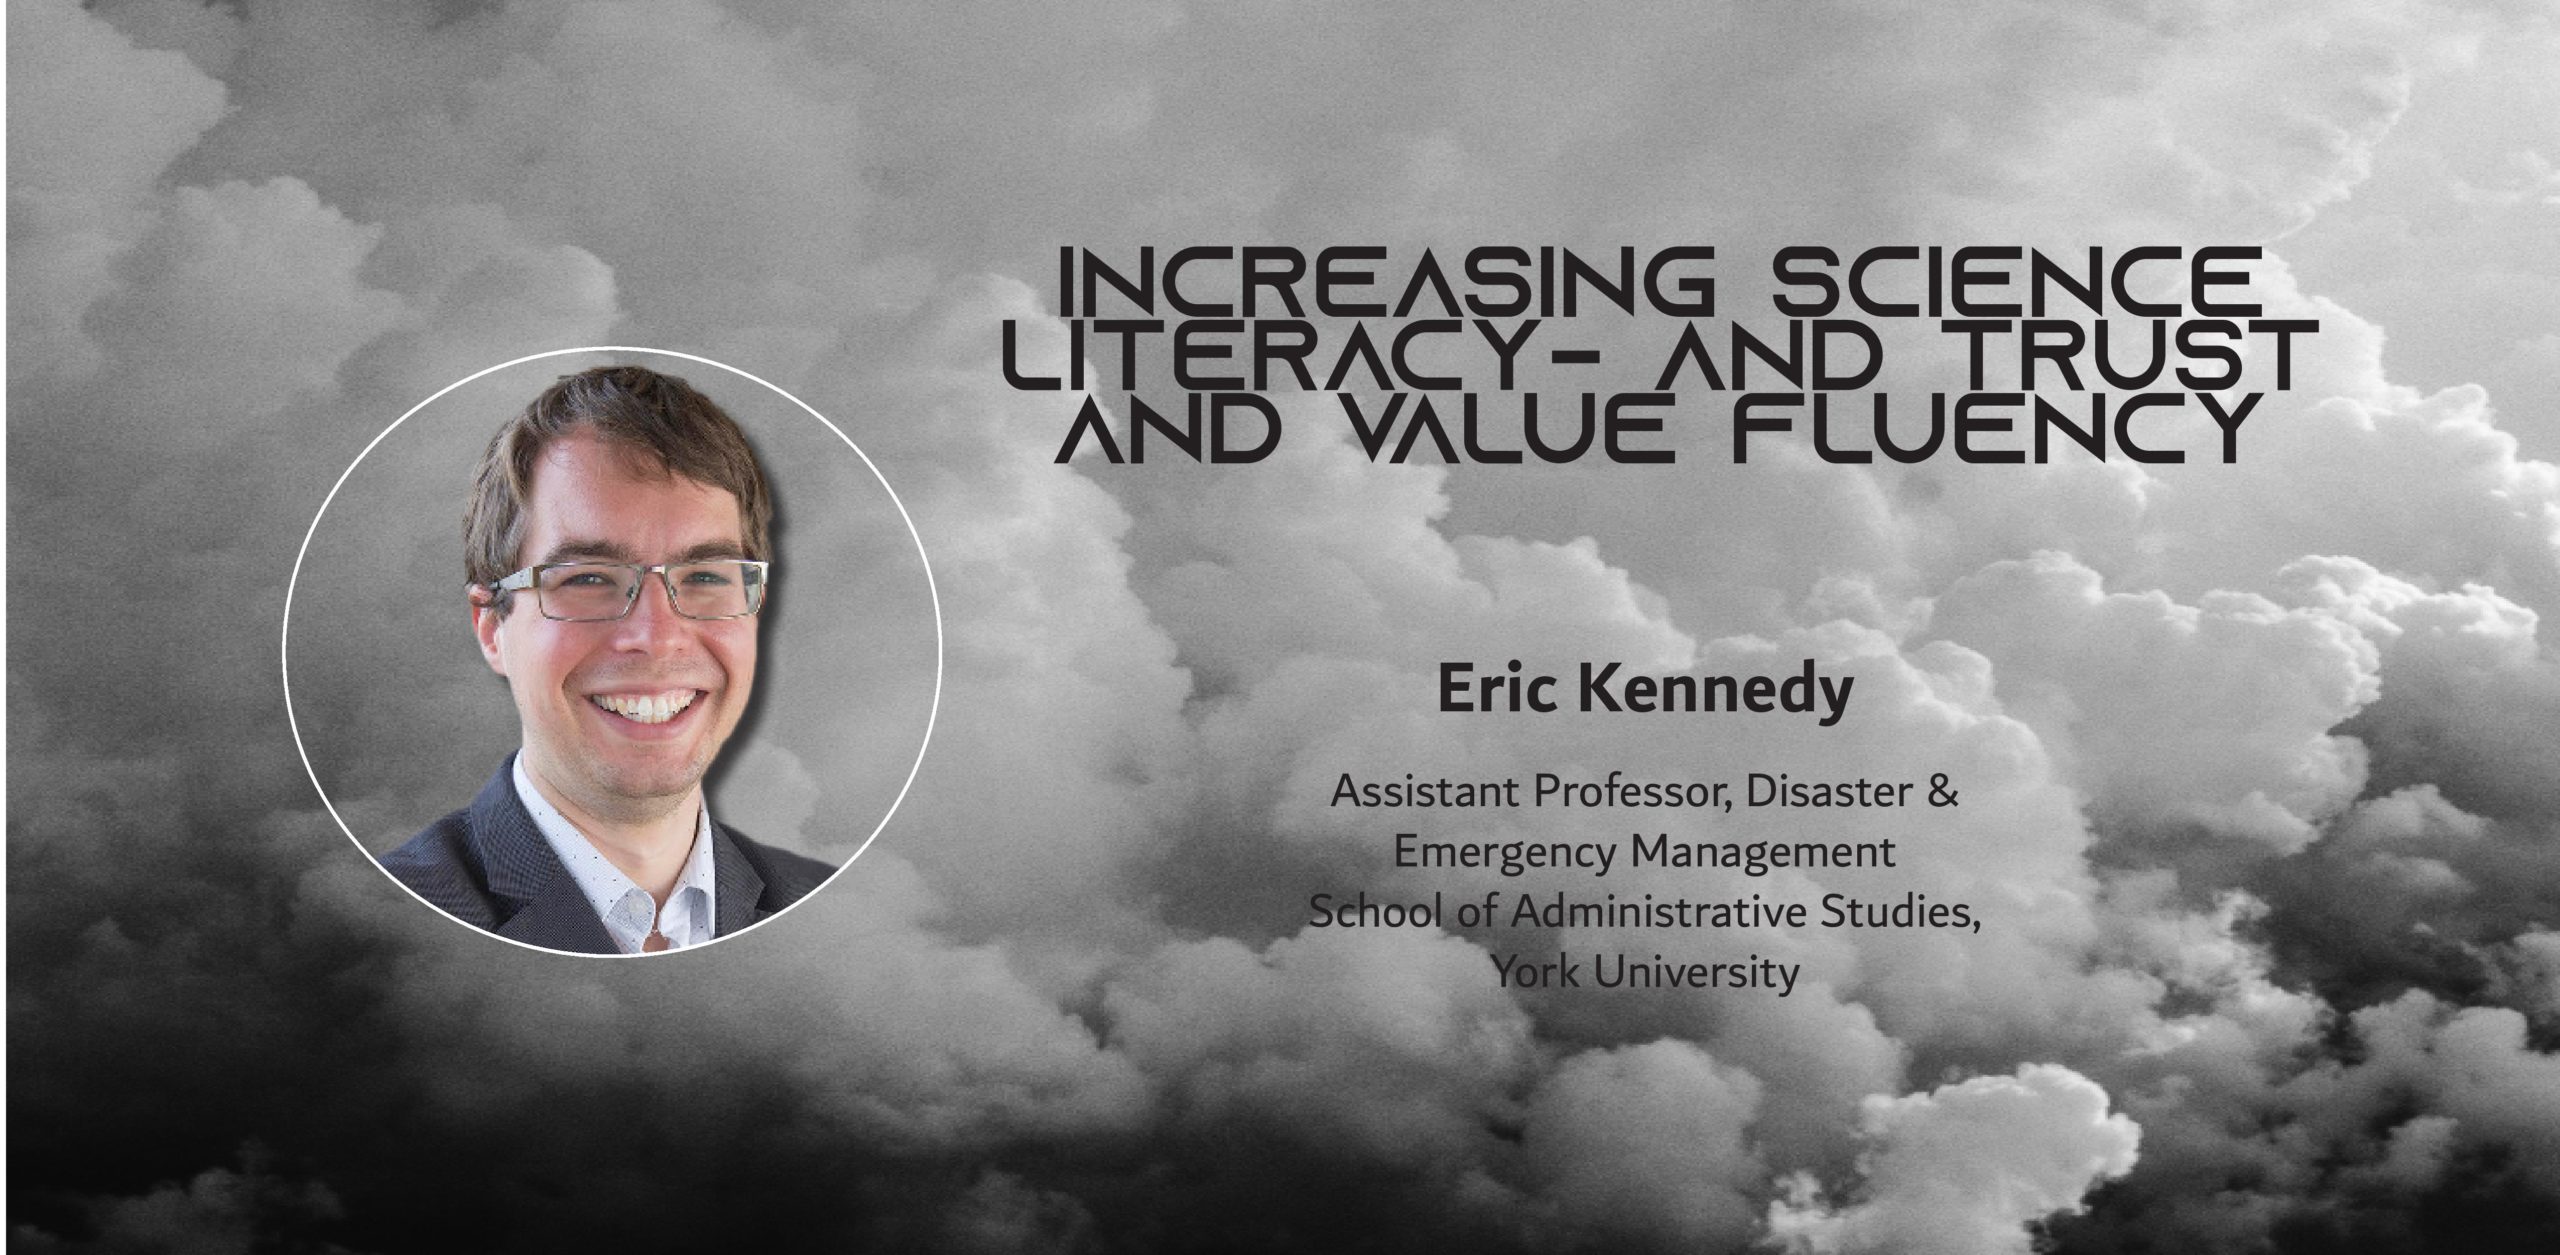 Image of a white man over clouds with the text: Increasing Science Literacyand Trust and Value Fluency Eric Kennedy Assistant Professor, Disaster & Emergency Management School of Administrative Studies, York University